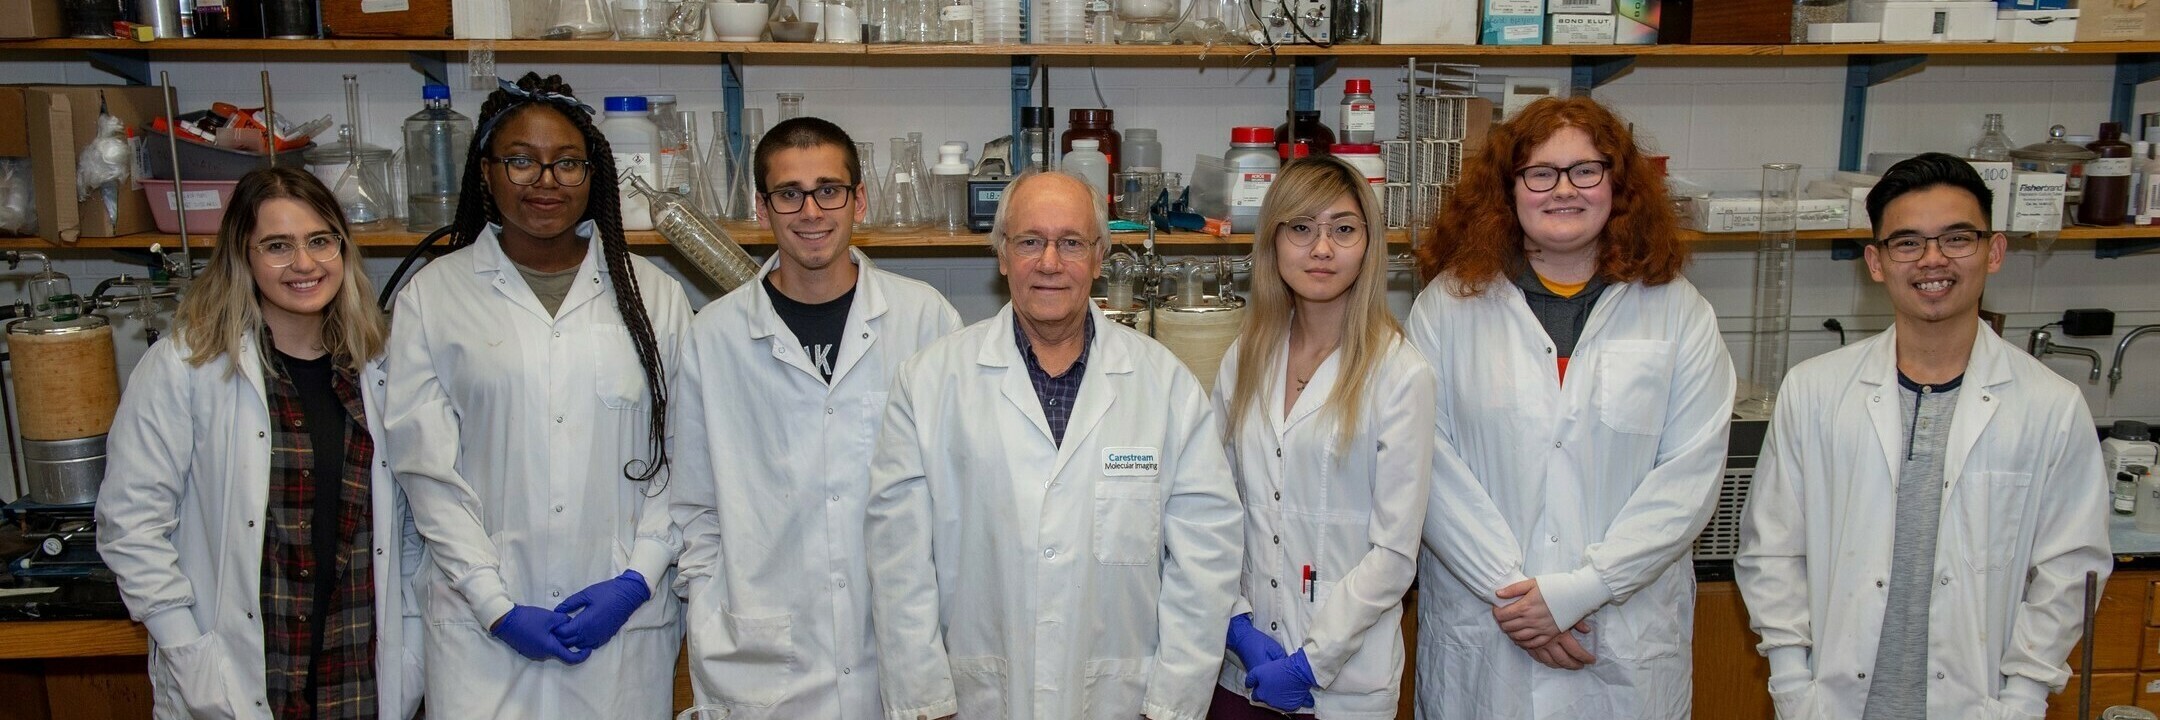 Hans Schmitthenner and group of research students who work in his lab